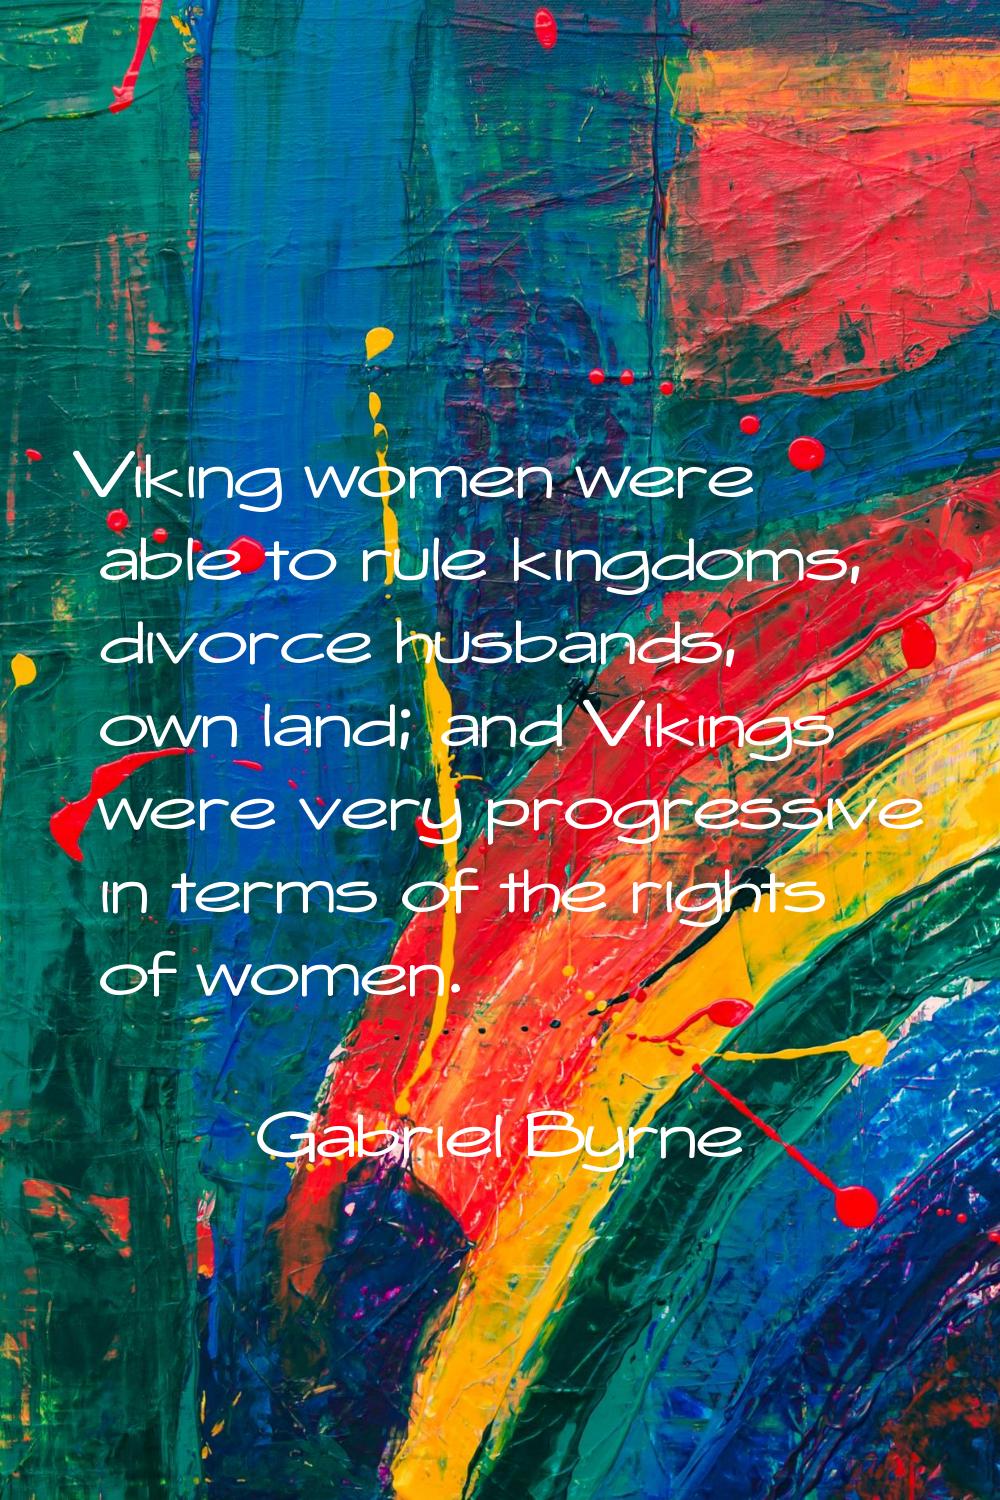 Viking women were able to rule kingdoms, divorce husbands, own land; and Vikings were very progress